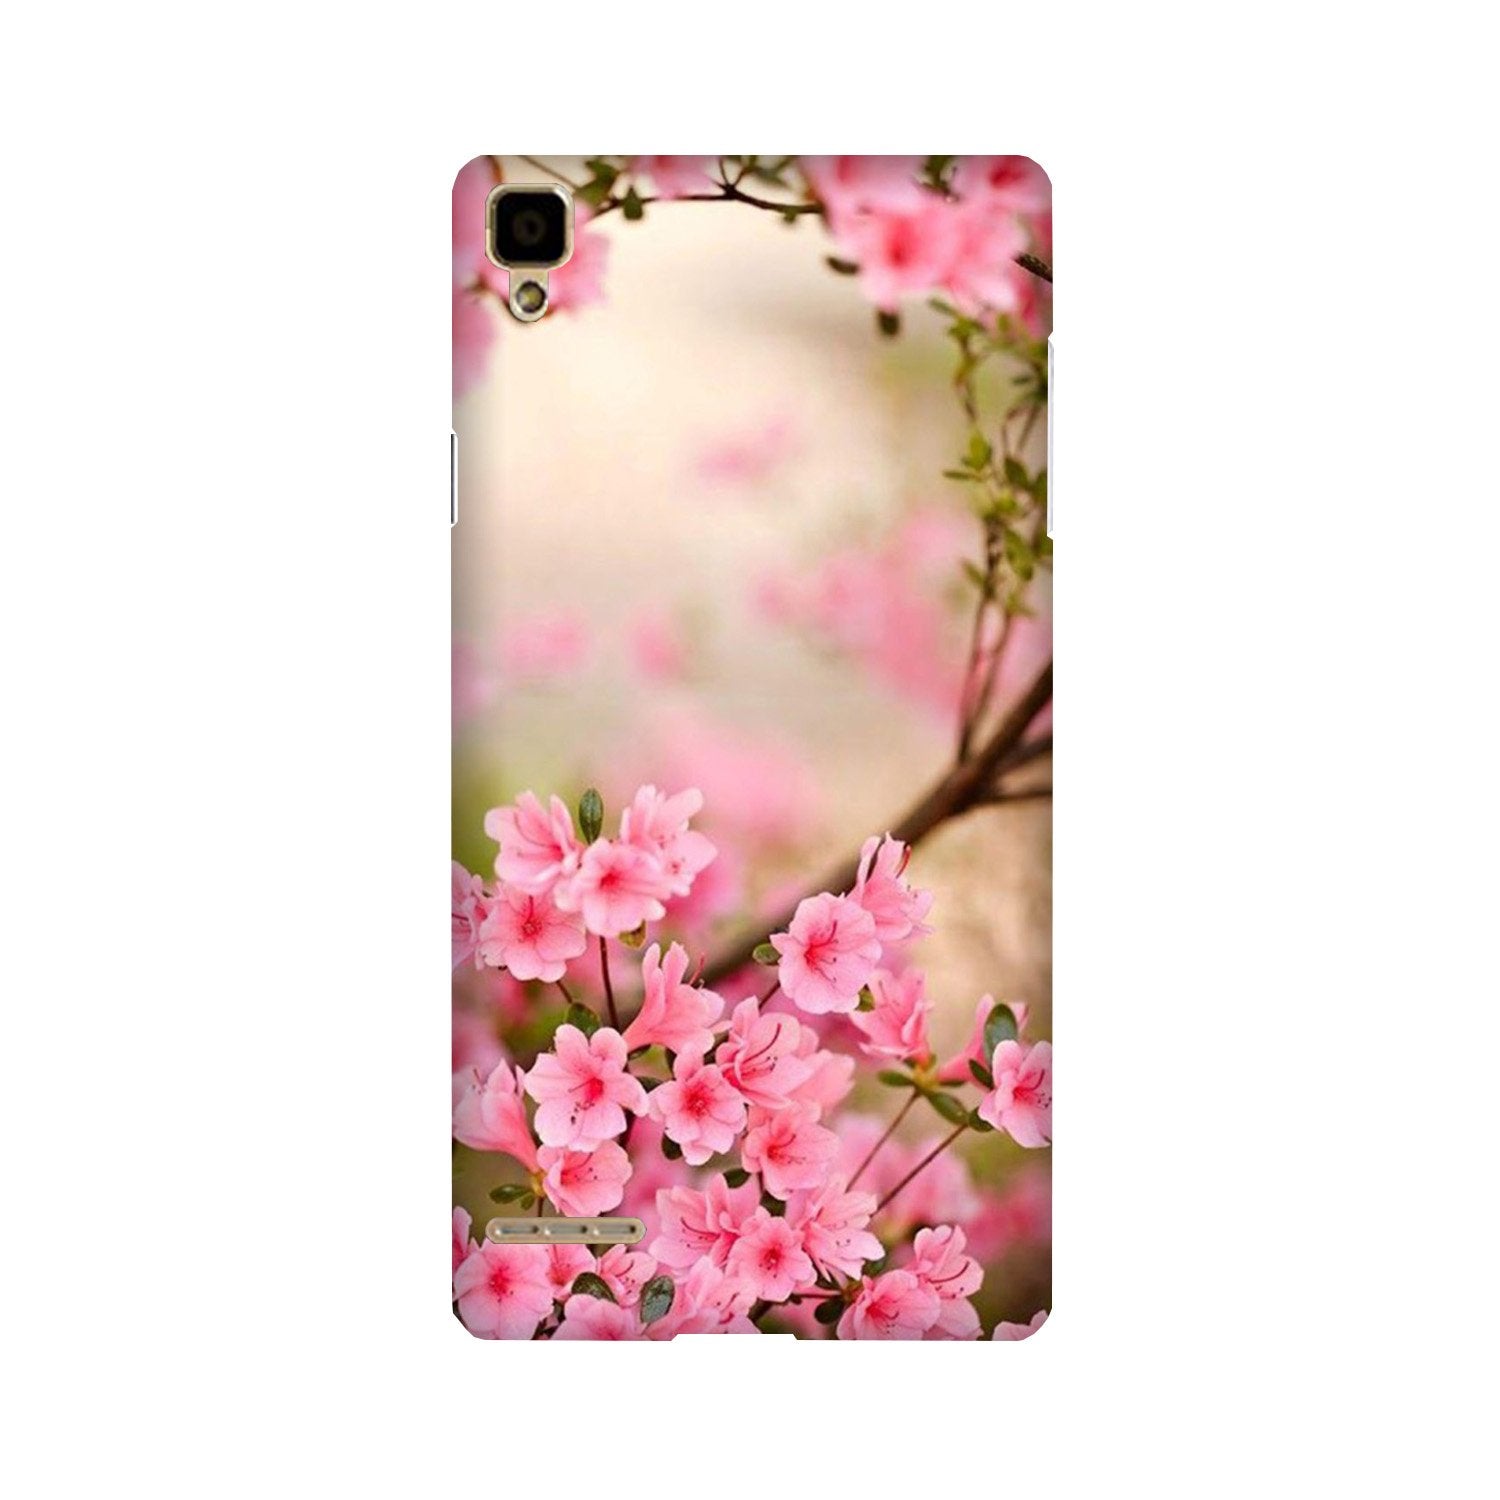 Pink flowers Case for Oppo F1